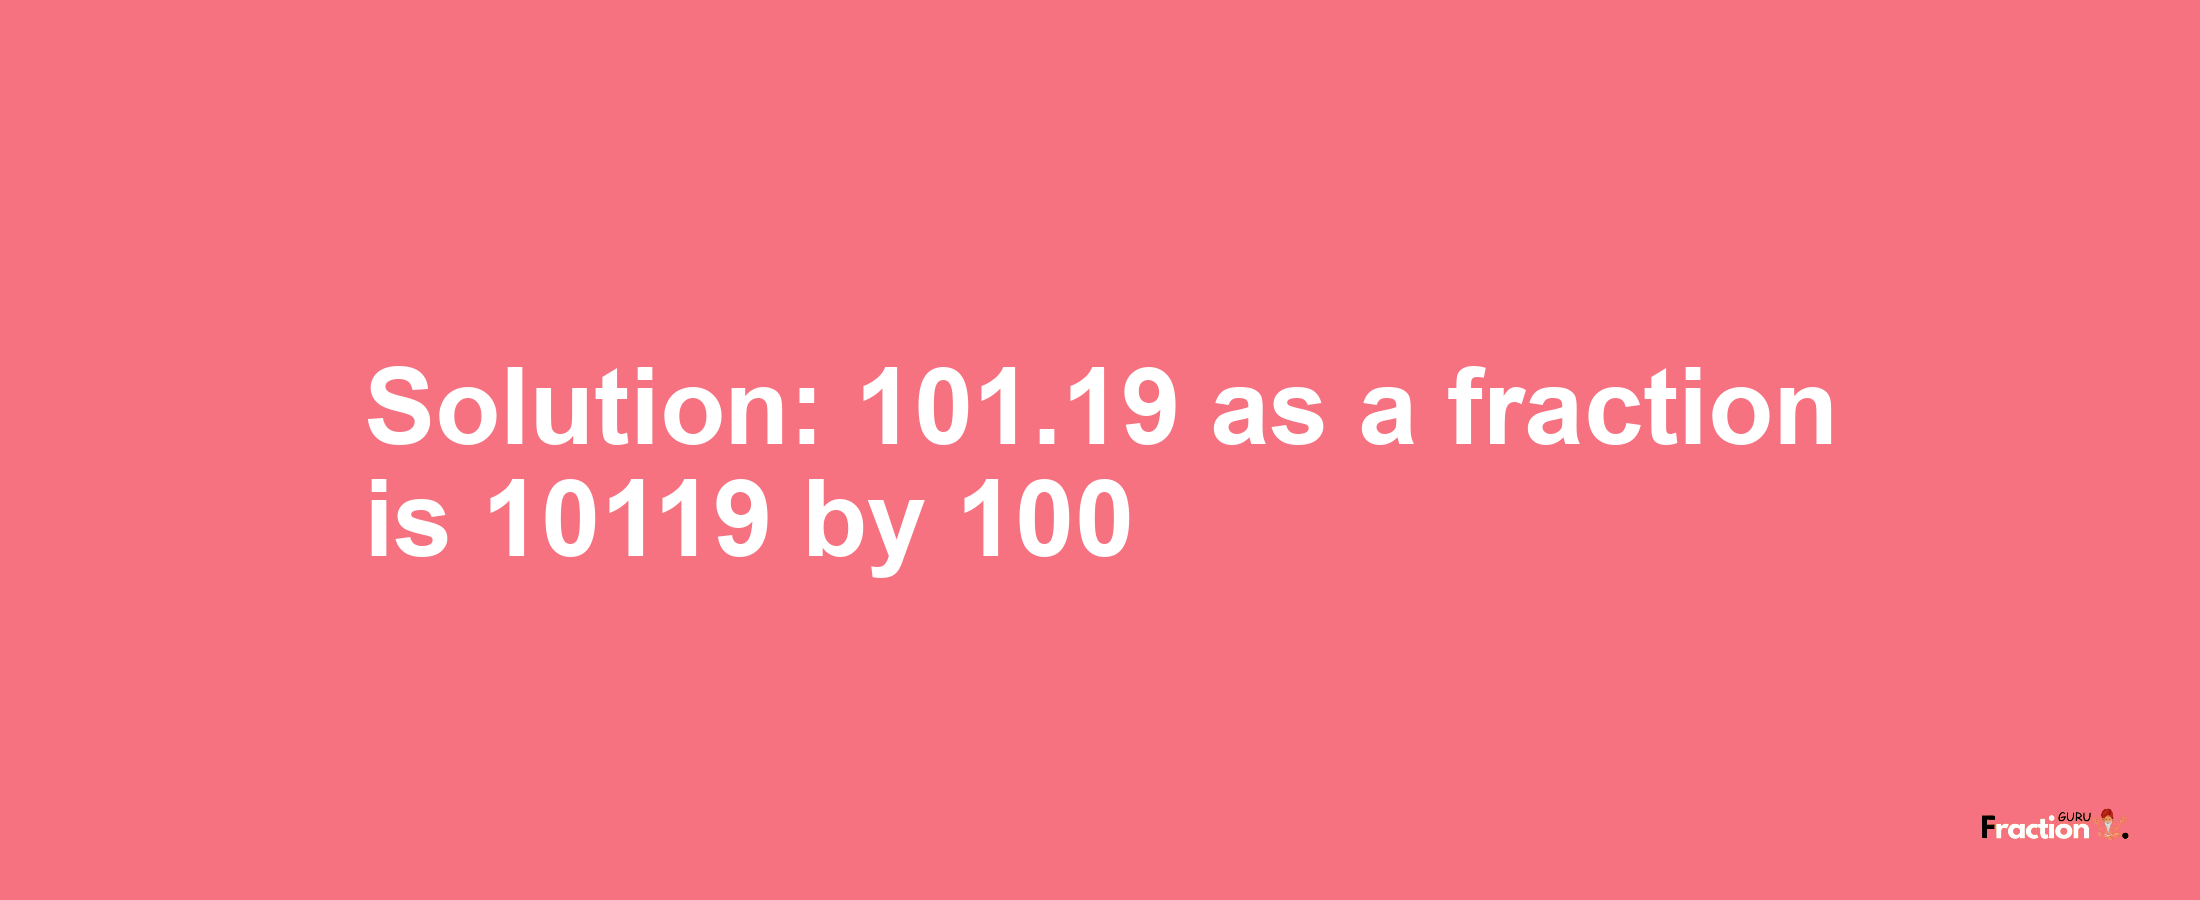 Solution:101.19 as a fraction is 10119/100